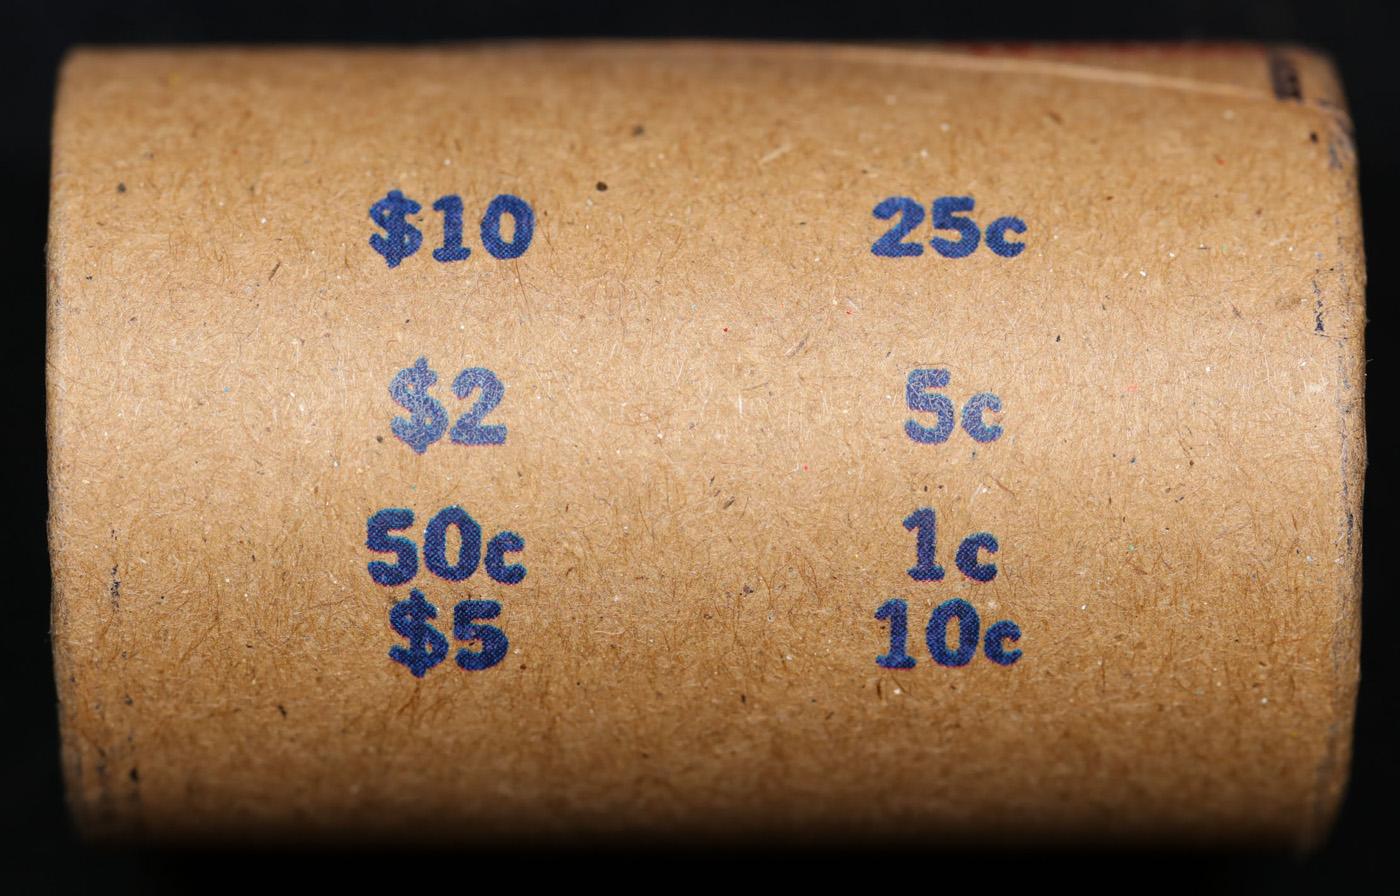 *EXCLUSIVE* x20 Morgan Covered End Roll! Marked "Unc Morgan Limited"! - Huge Vault Hoard  (FC)